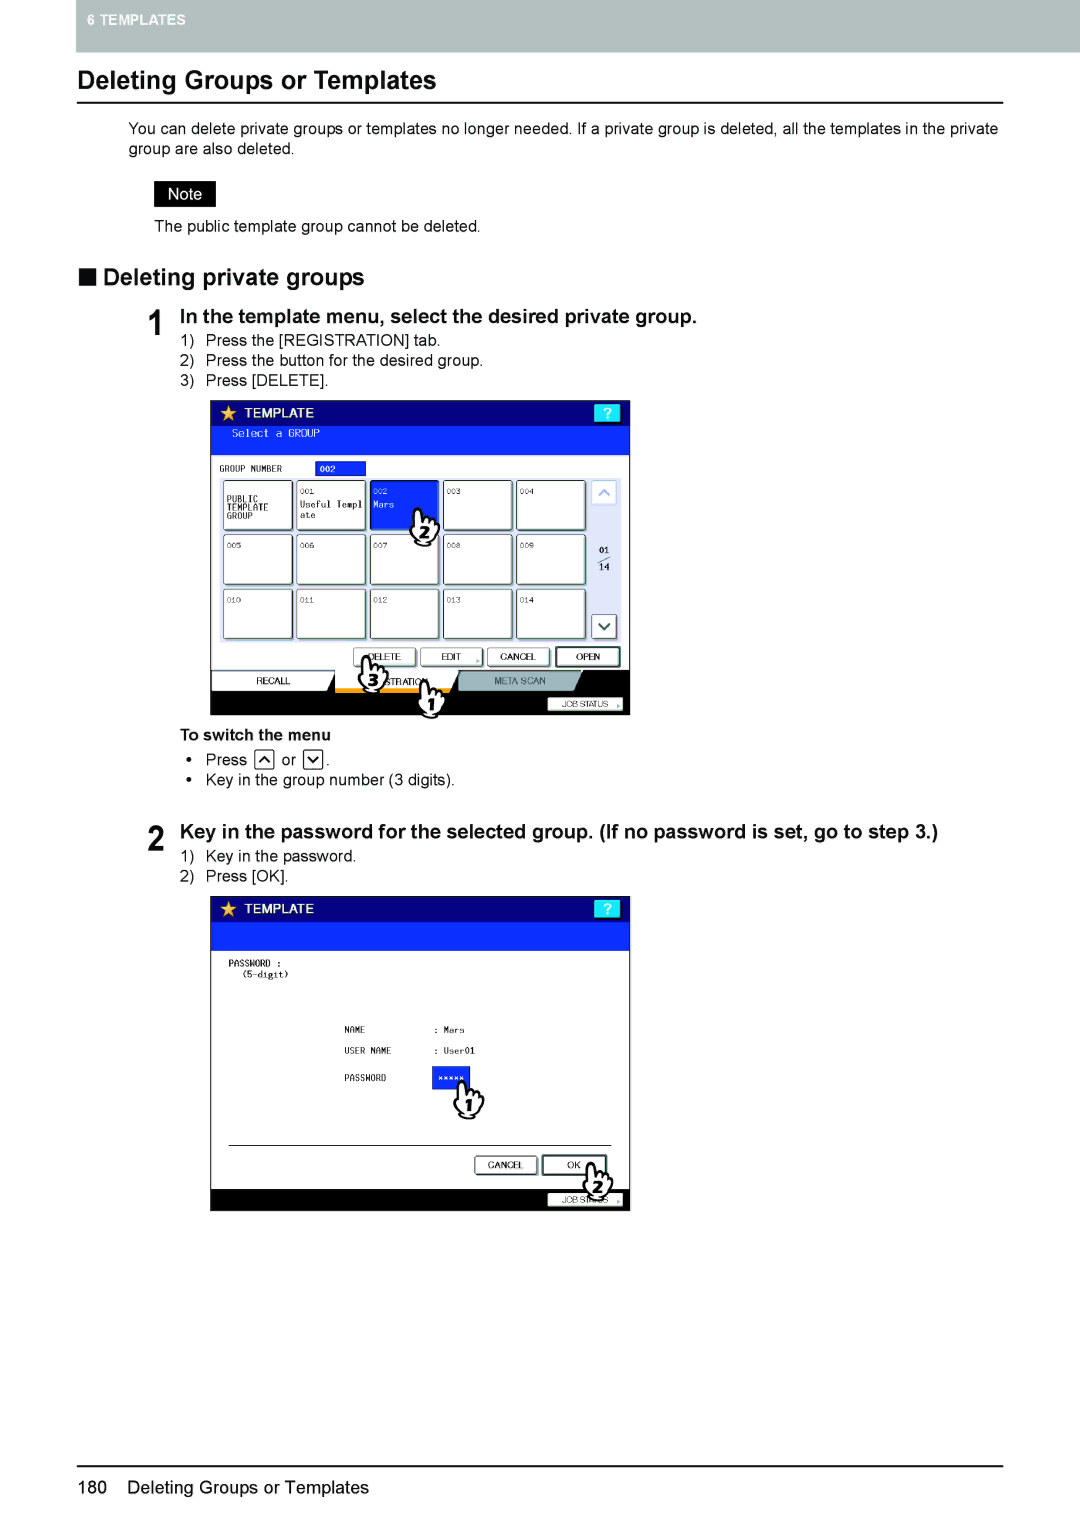 Toshiba 6520c Deleting Groups or Templates, „ Deleting private groups, Template menu, select the desired private group 